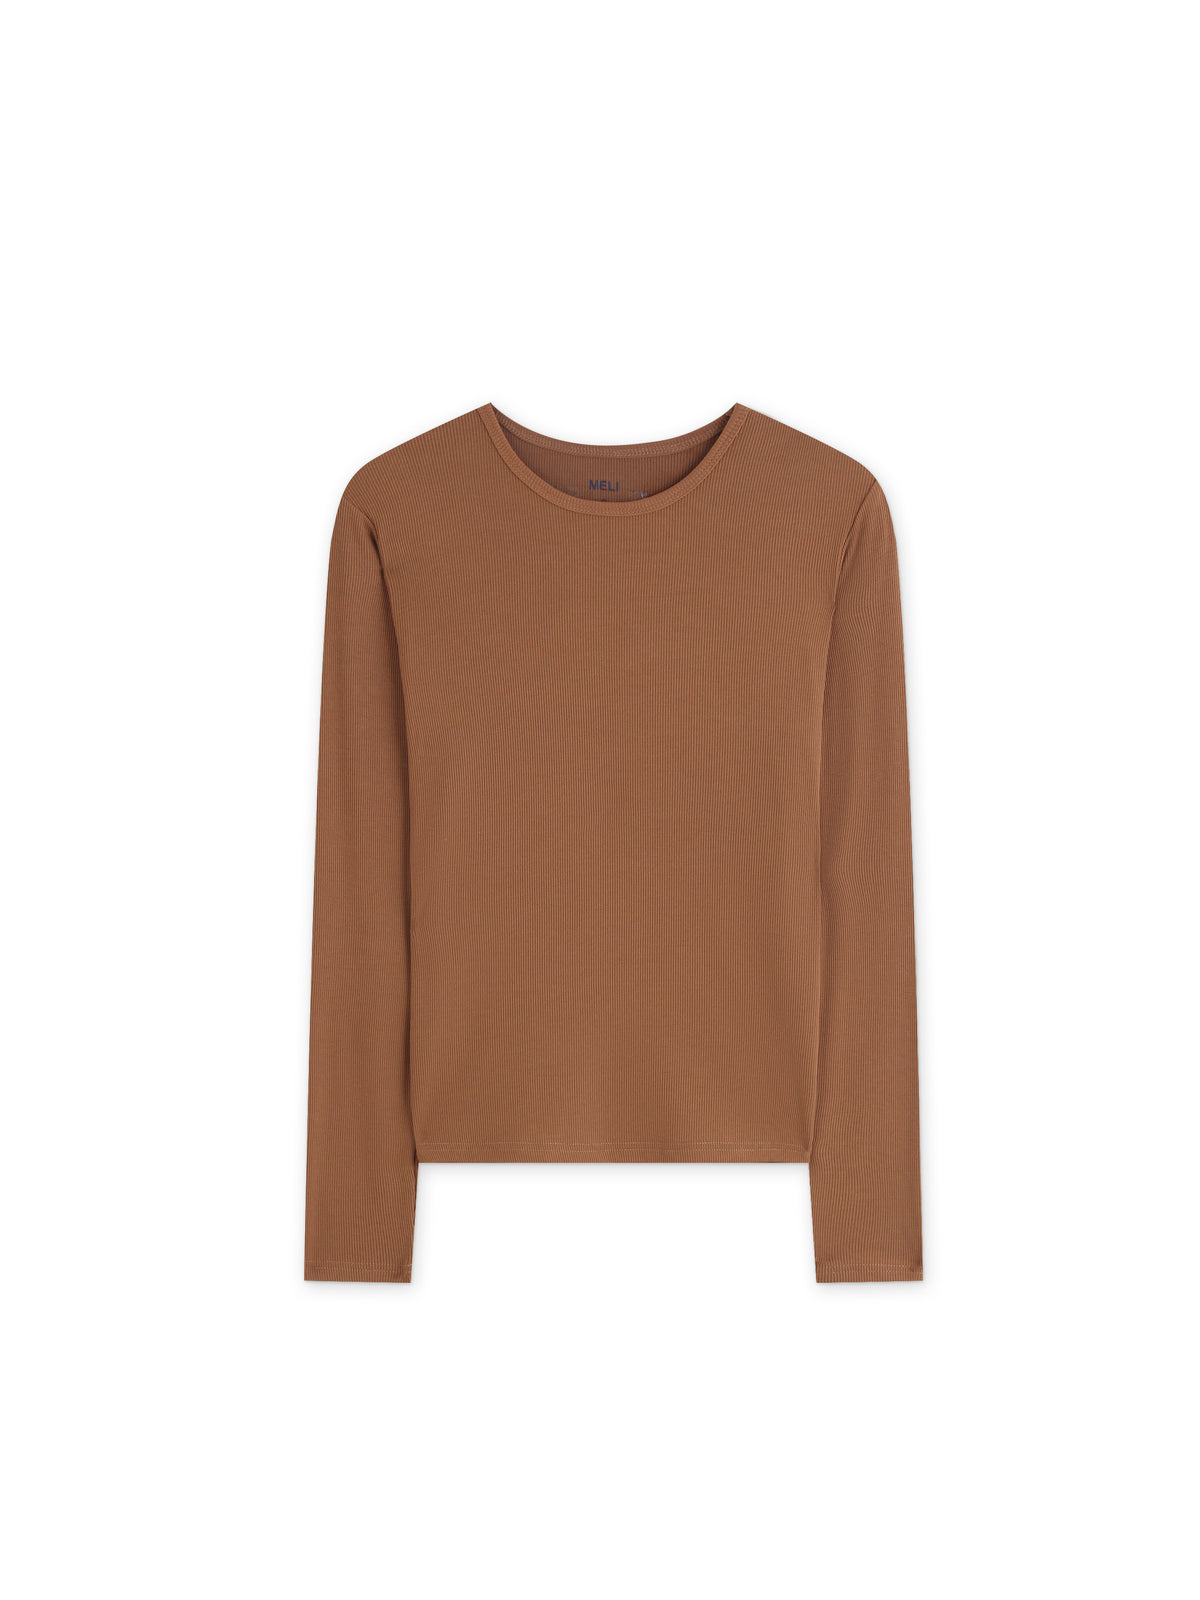 CLASSIC RIBBED CREW TEE LS-BROWN